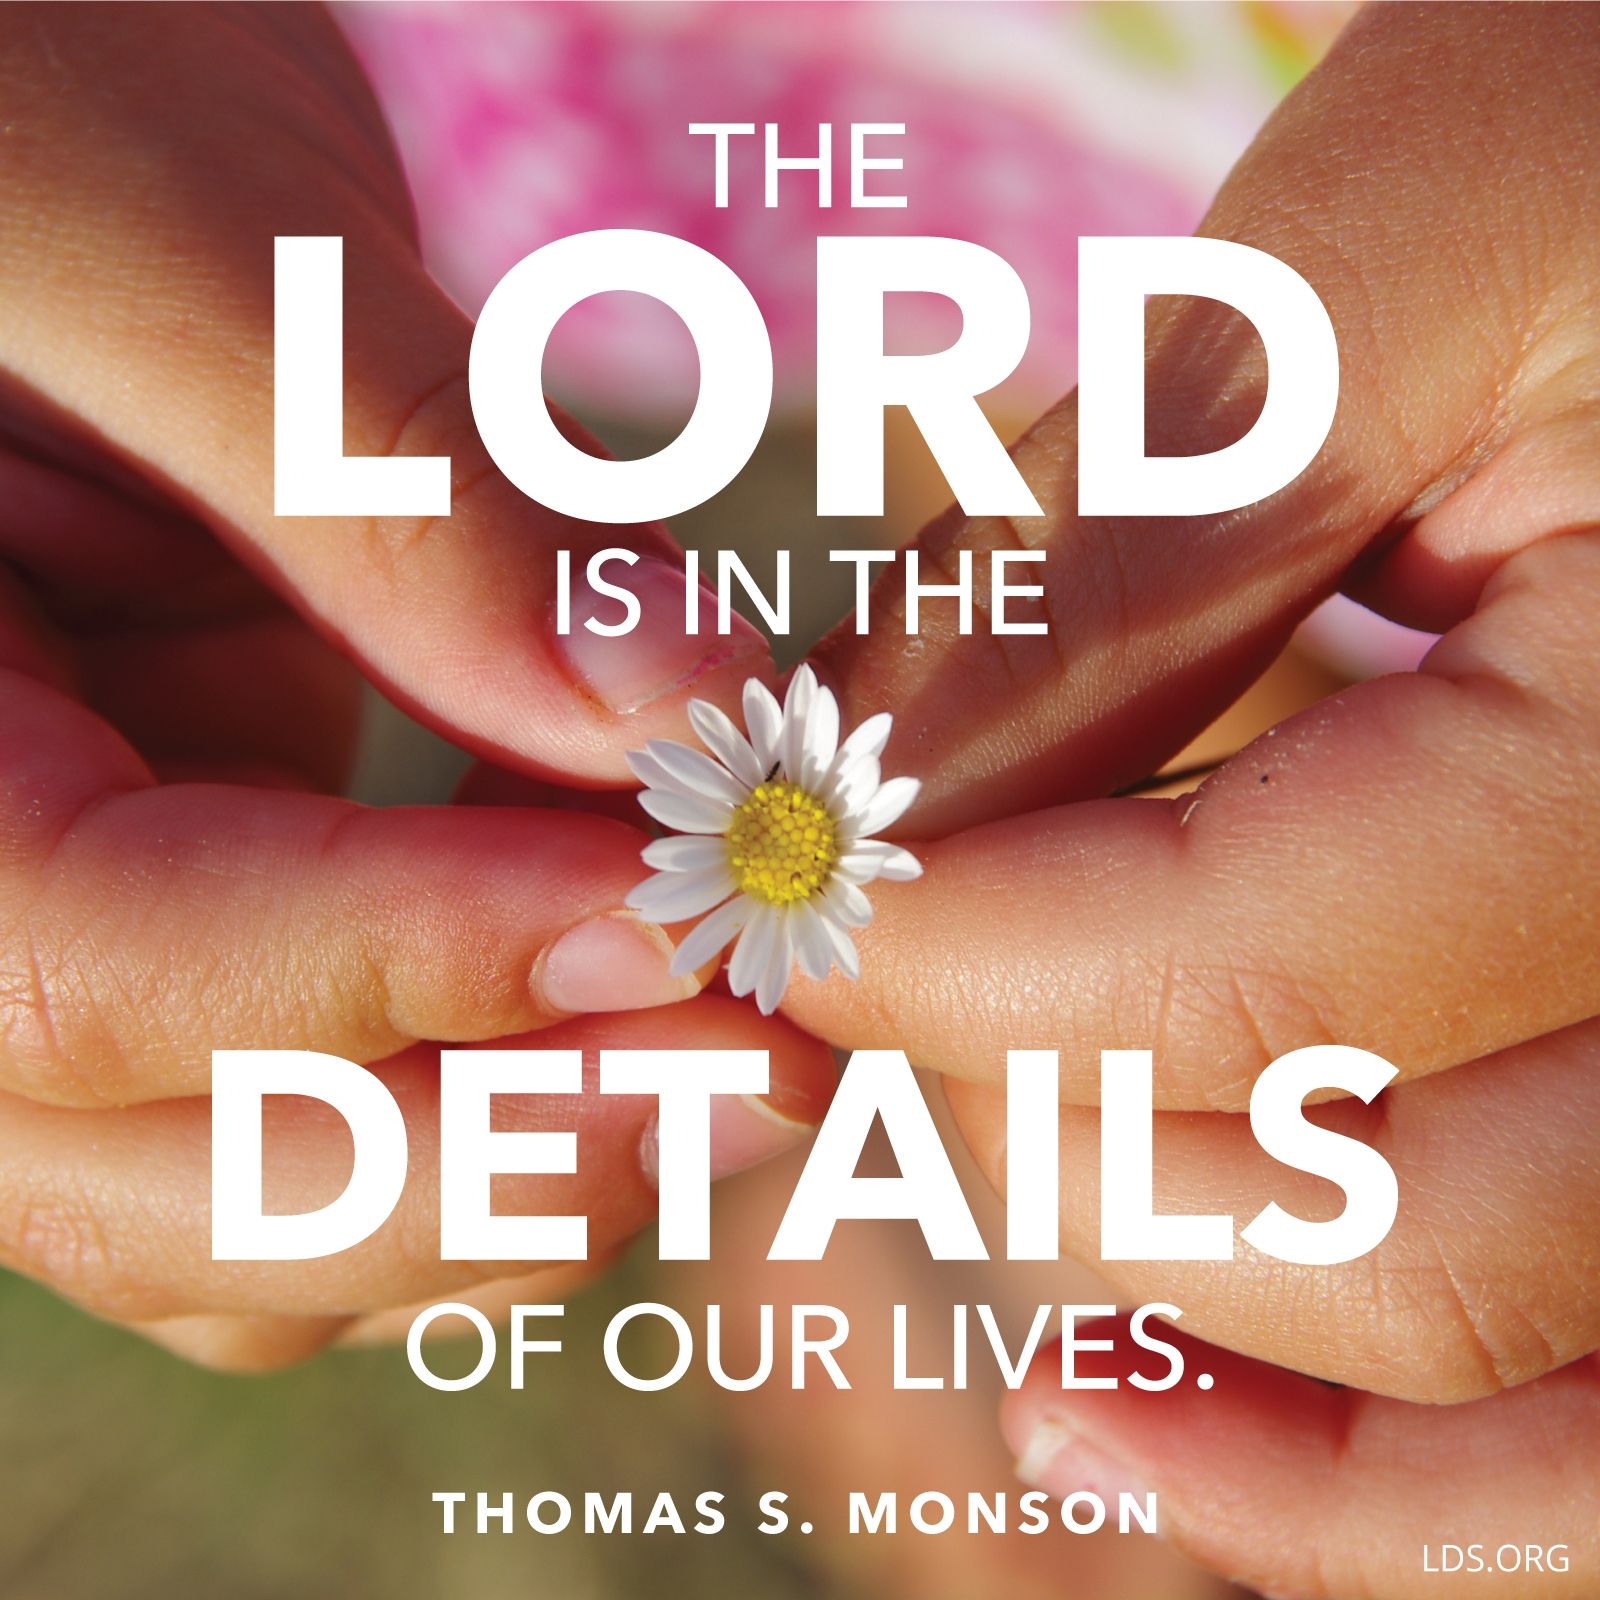 “The Lord is in the details of our lives.”—President Thomas S. Monson, “Consider the Blessings”